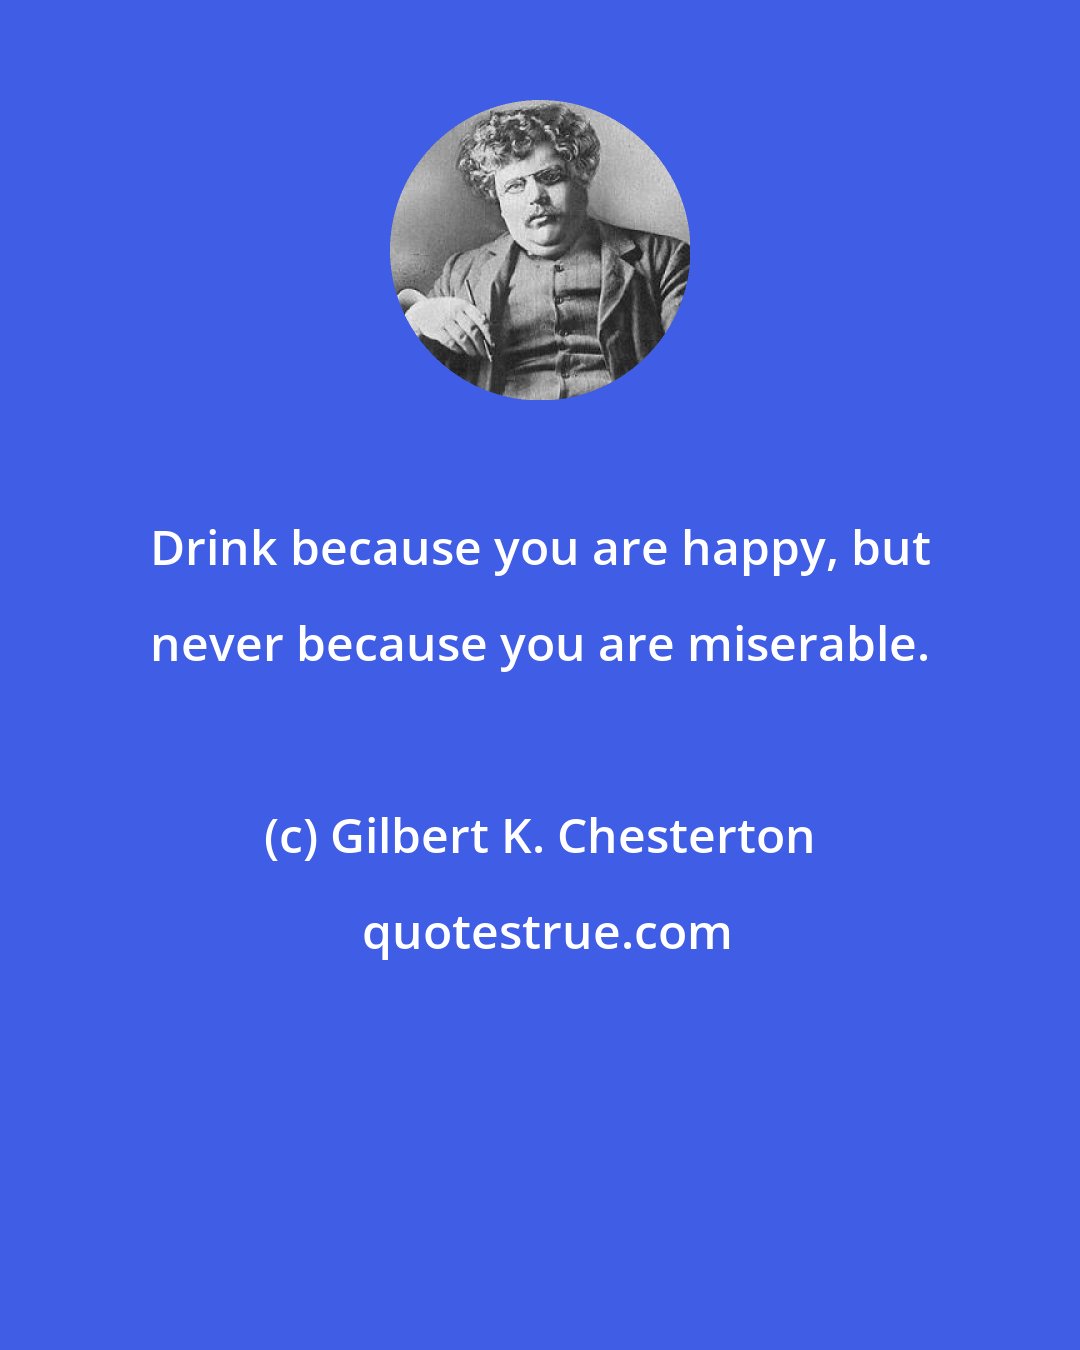 Gilbert K. Chesterton: Drink because you are happy, but never because you are miserable.